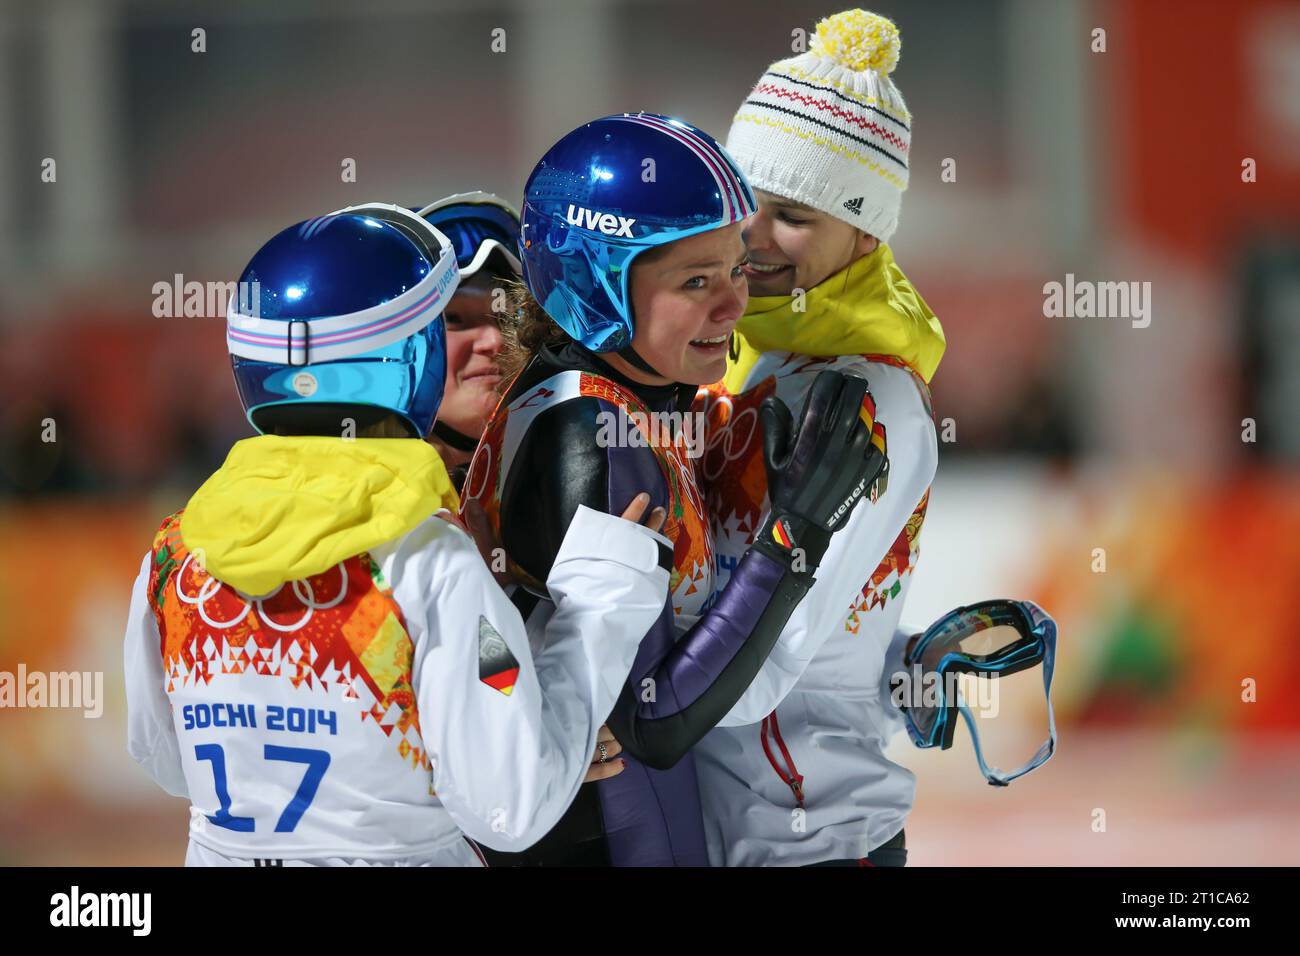 hi-res - - photography images 31 Page stock Ulrike and Alamy